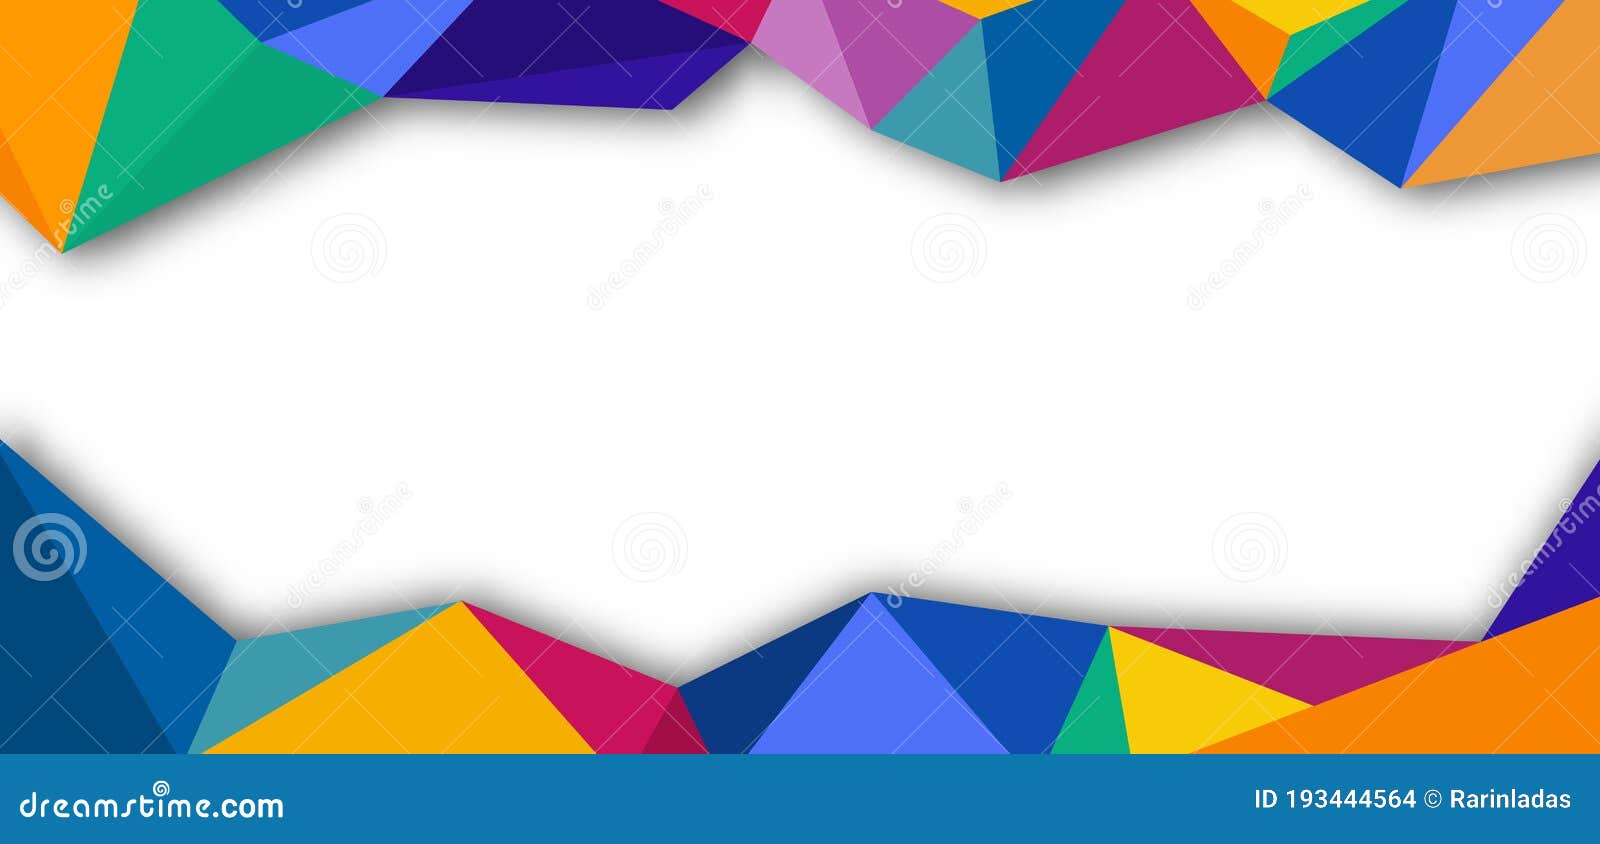 Abstract Banner Template Design Colorful Low Poly Art Style on ...